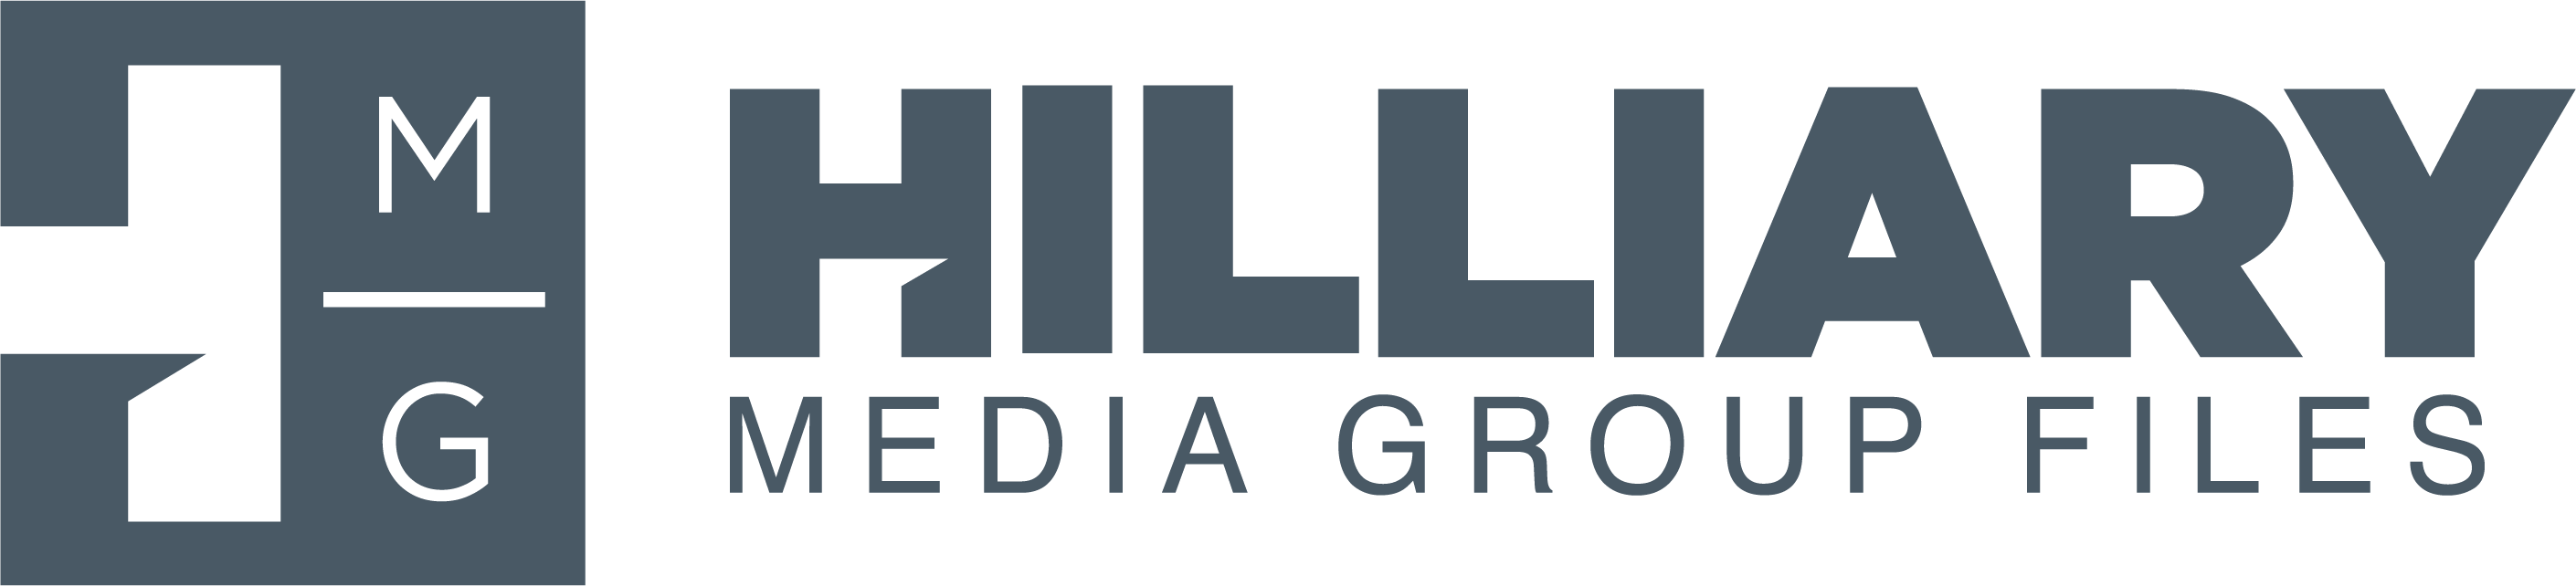 Hilliary Media Group Files